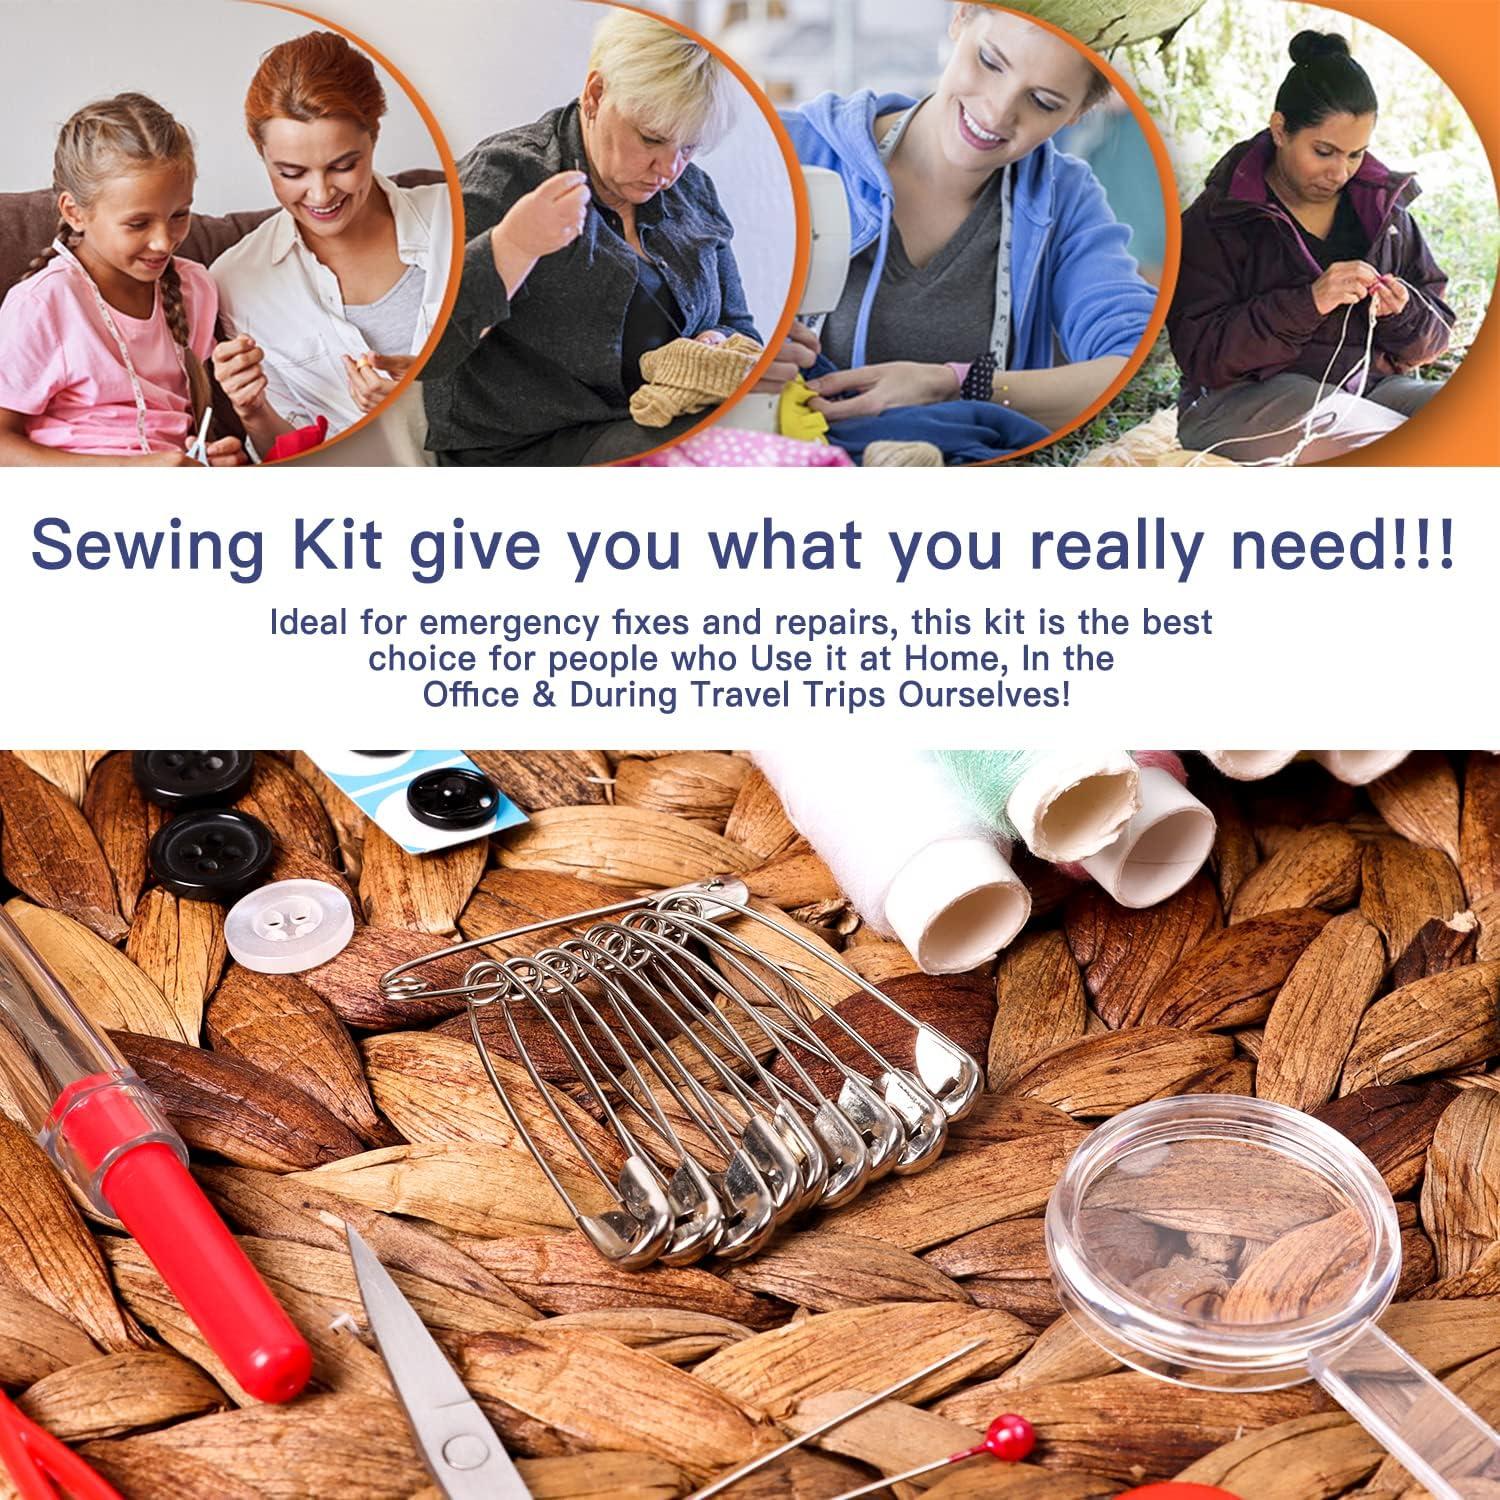 Travel Sewing Kit for Adults and Kids - Small Beginner Set w